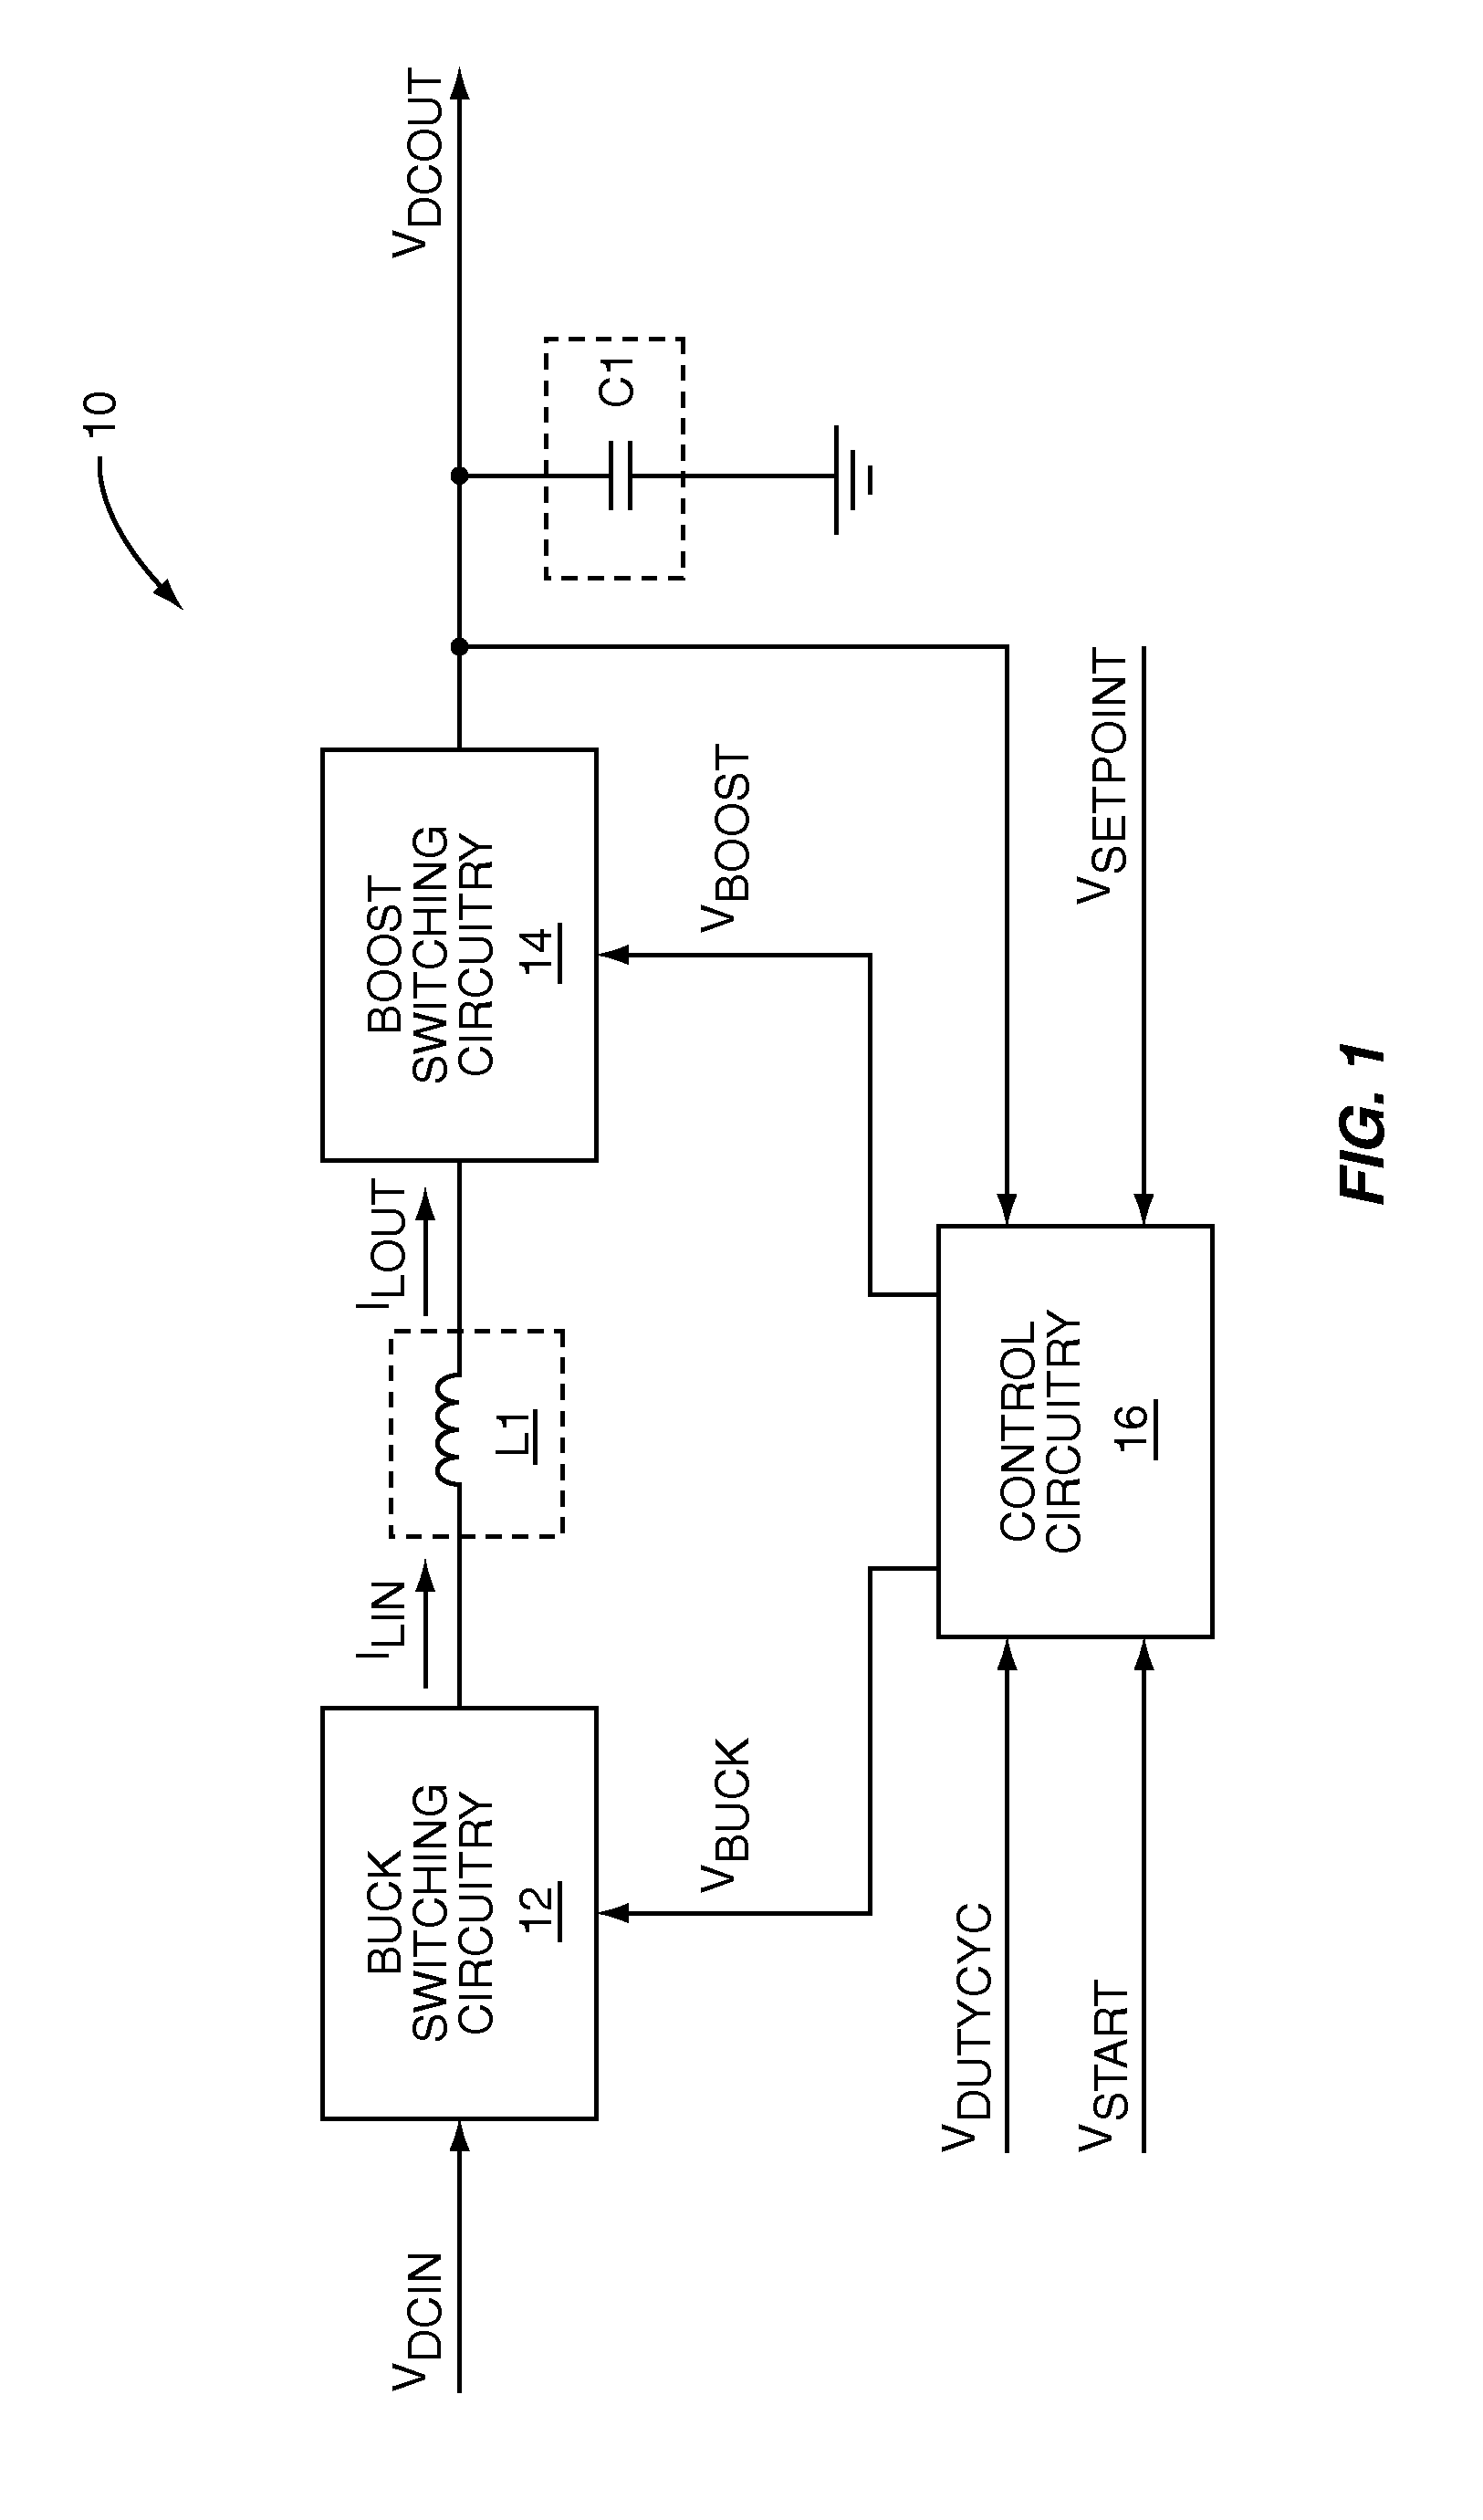 Switching power converter that supports both a boost mode of operation and a buck mode of operation using a common duty-cycle timing signal